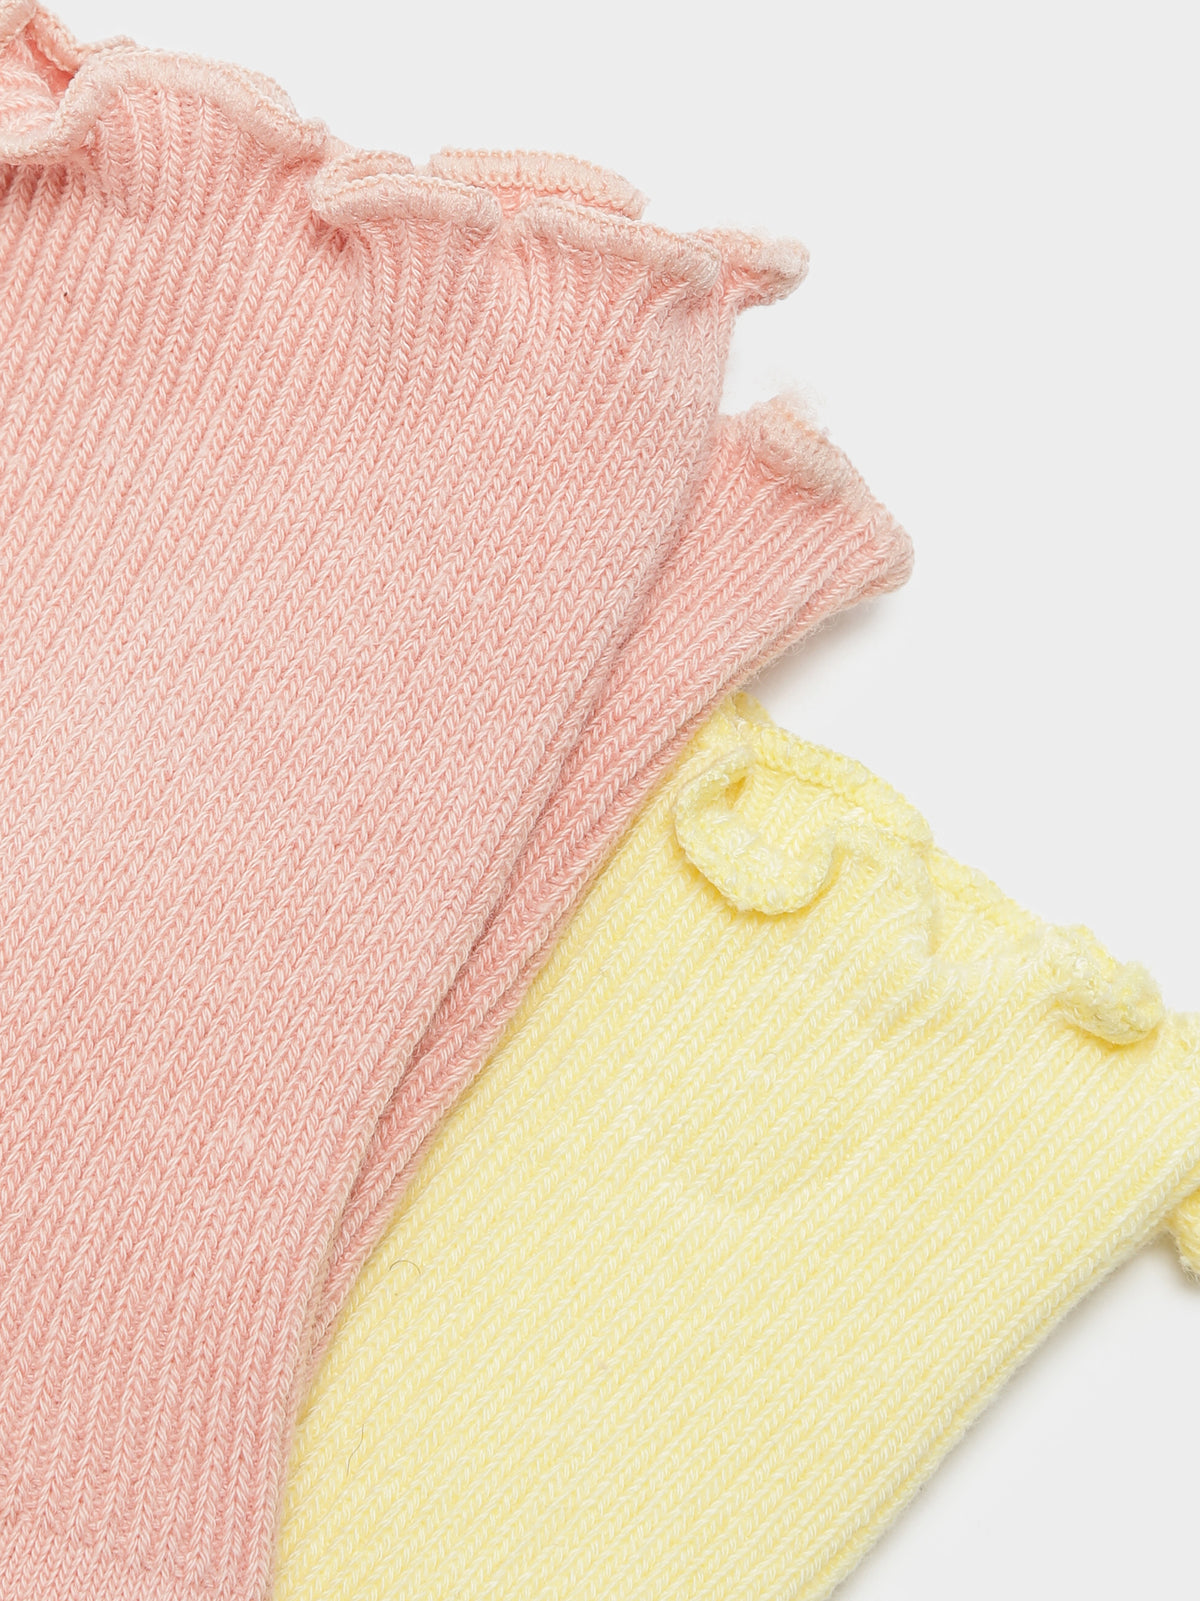 2 Pairs of Ruffle Ankle Socks in Rose and Lemon